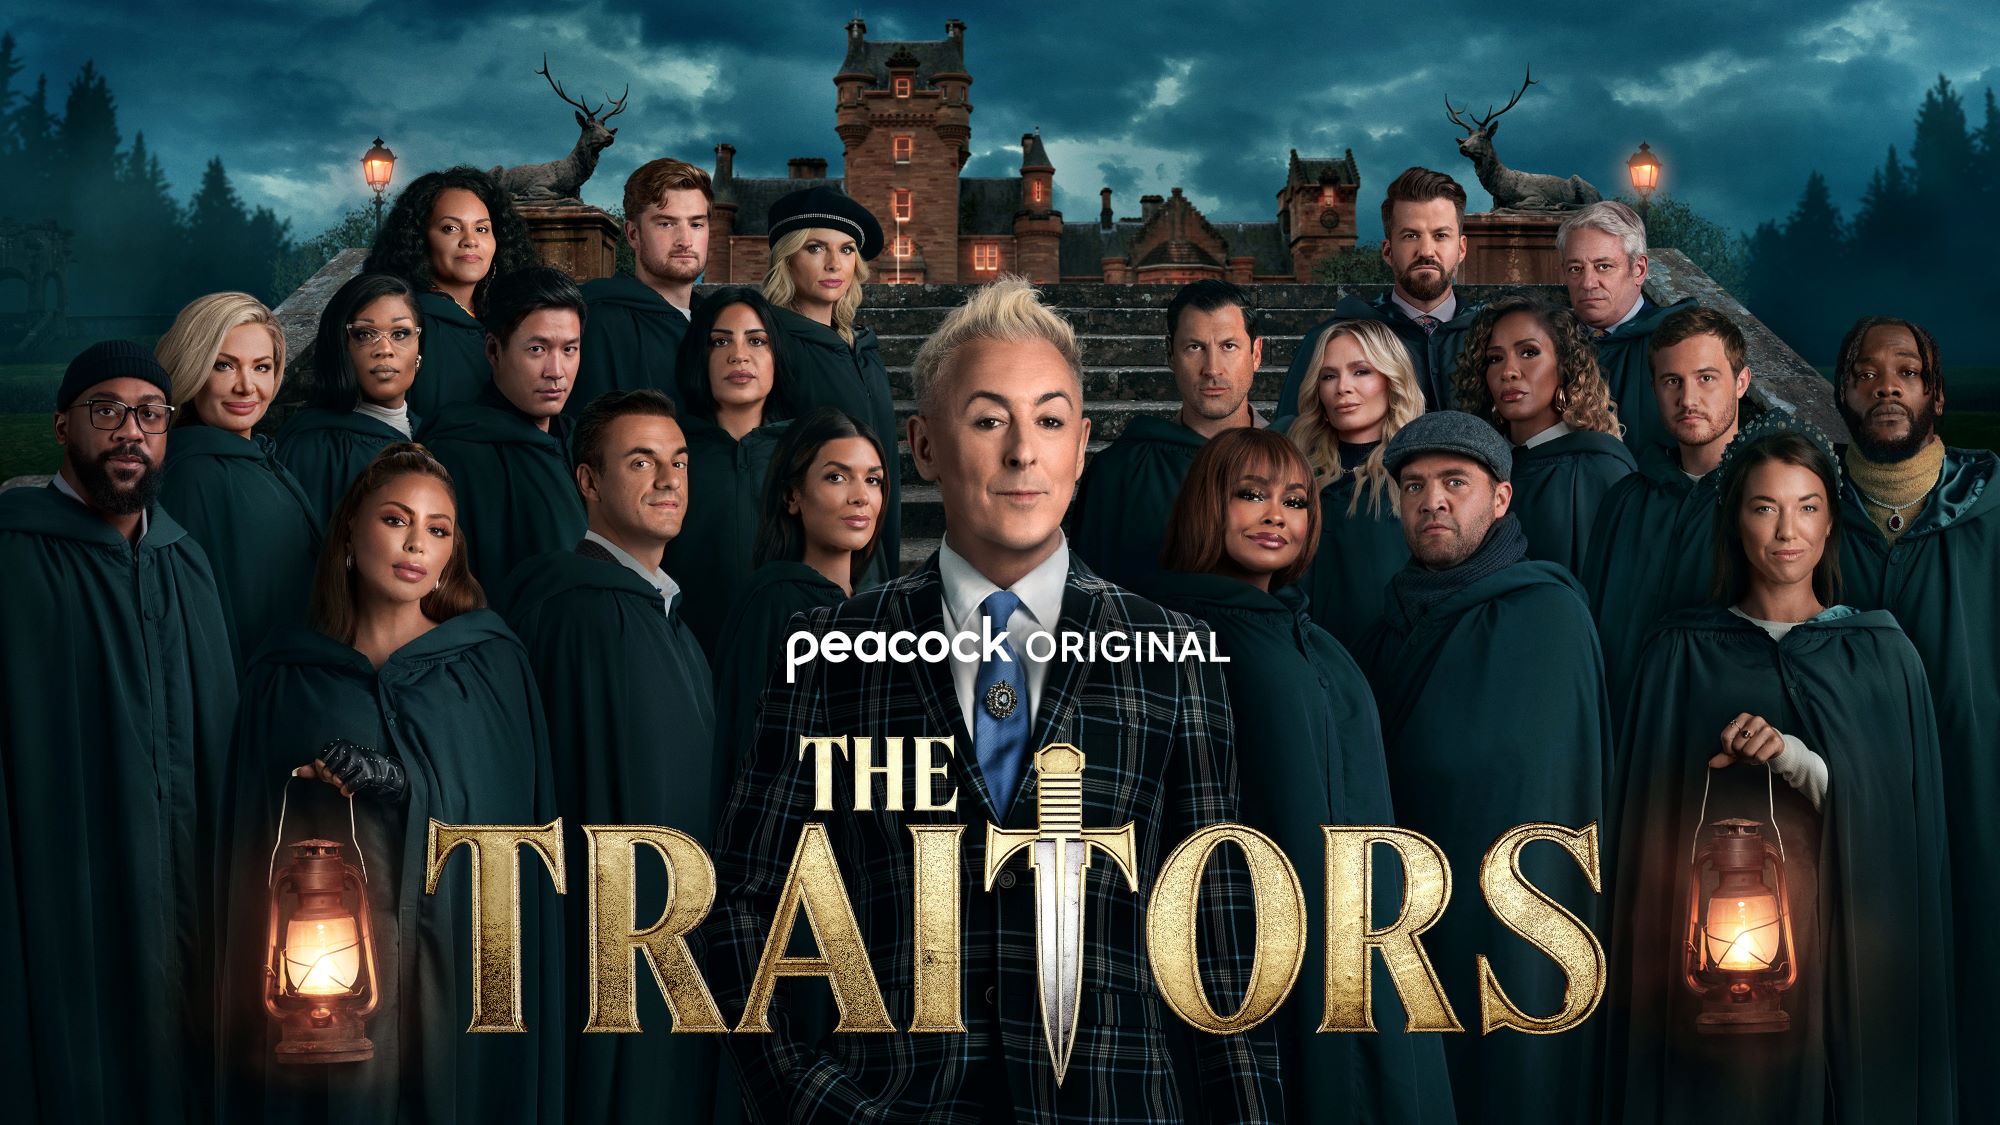 An image of the cast of The Traitors.